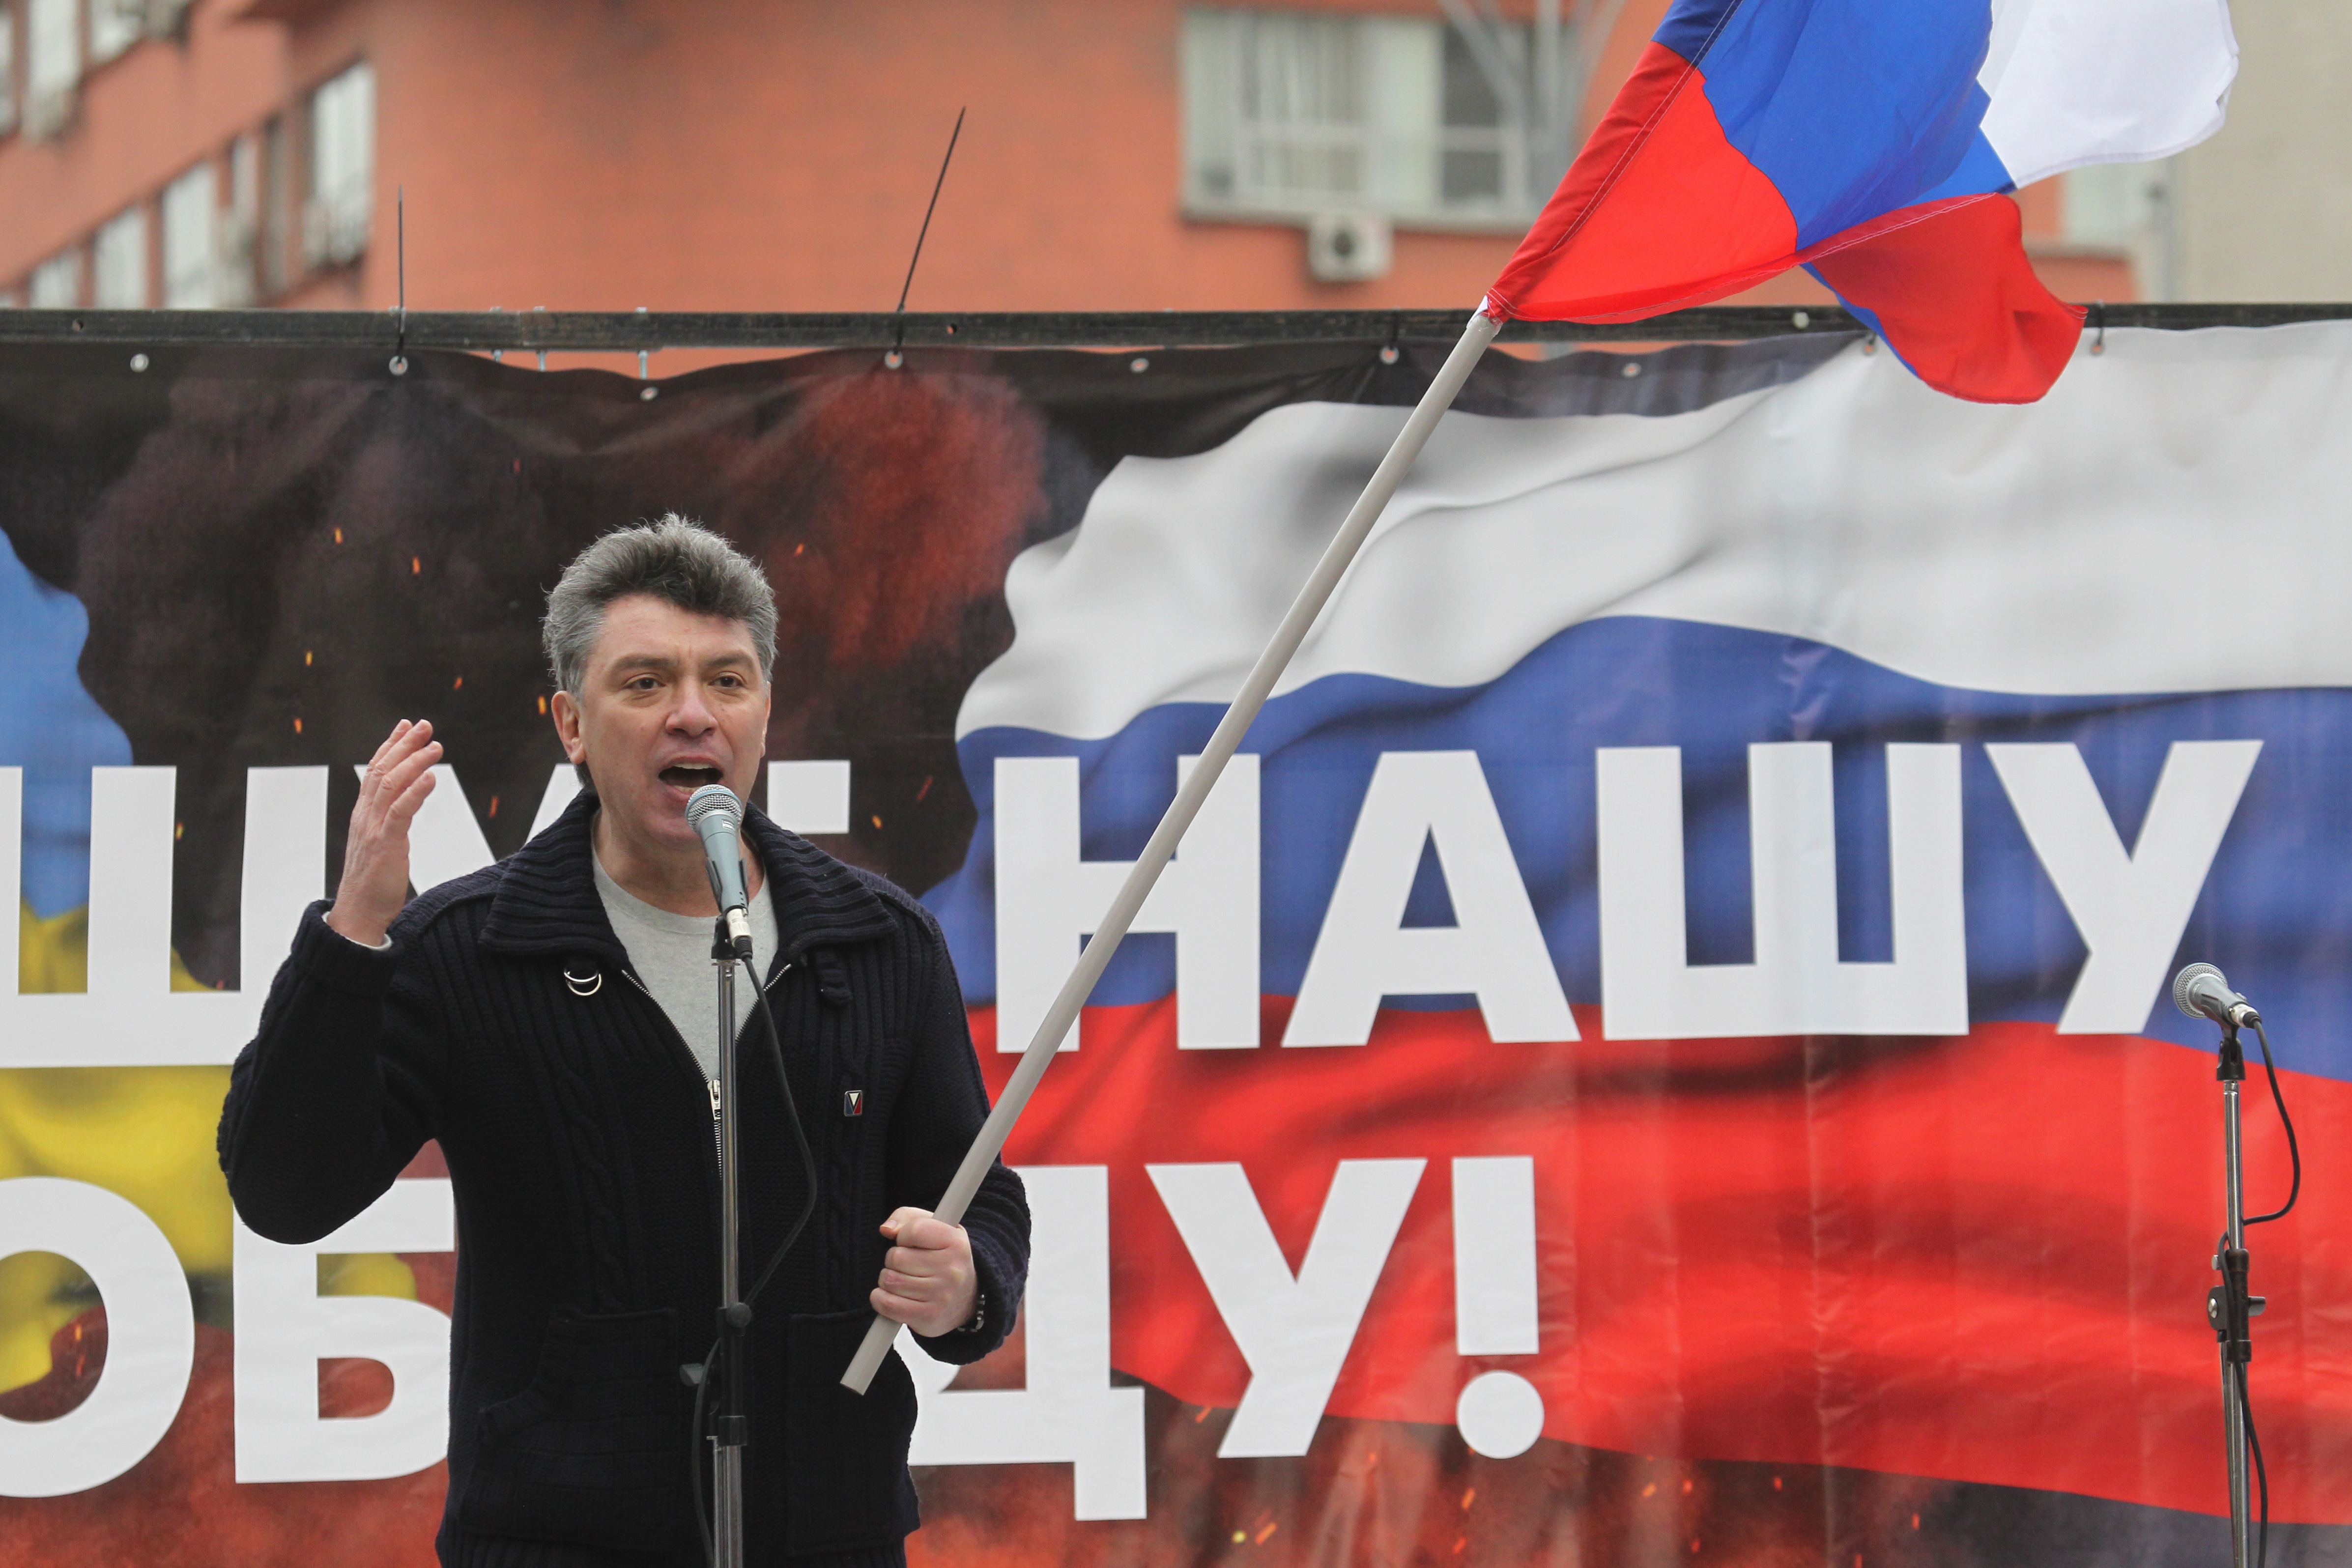 Russian opposition leader and former Deputy Prime Minister Boris Nemtsov speaks during a rally against the policies and intervention in Ukraine and a possible war in Crimea, on March 15. (Sasha Mordovets—Getty Images)